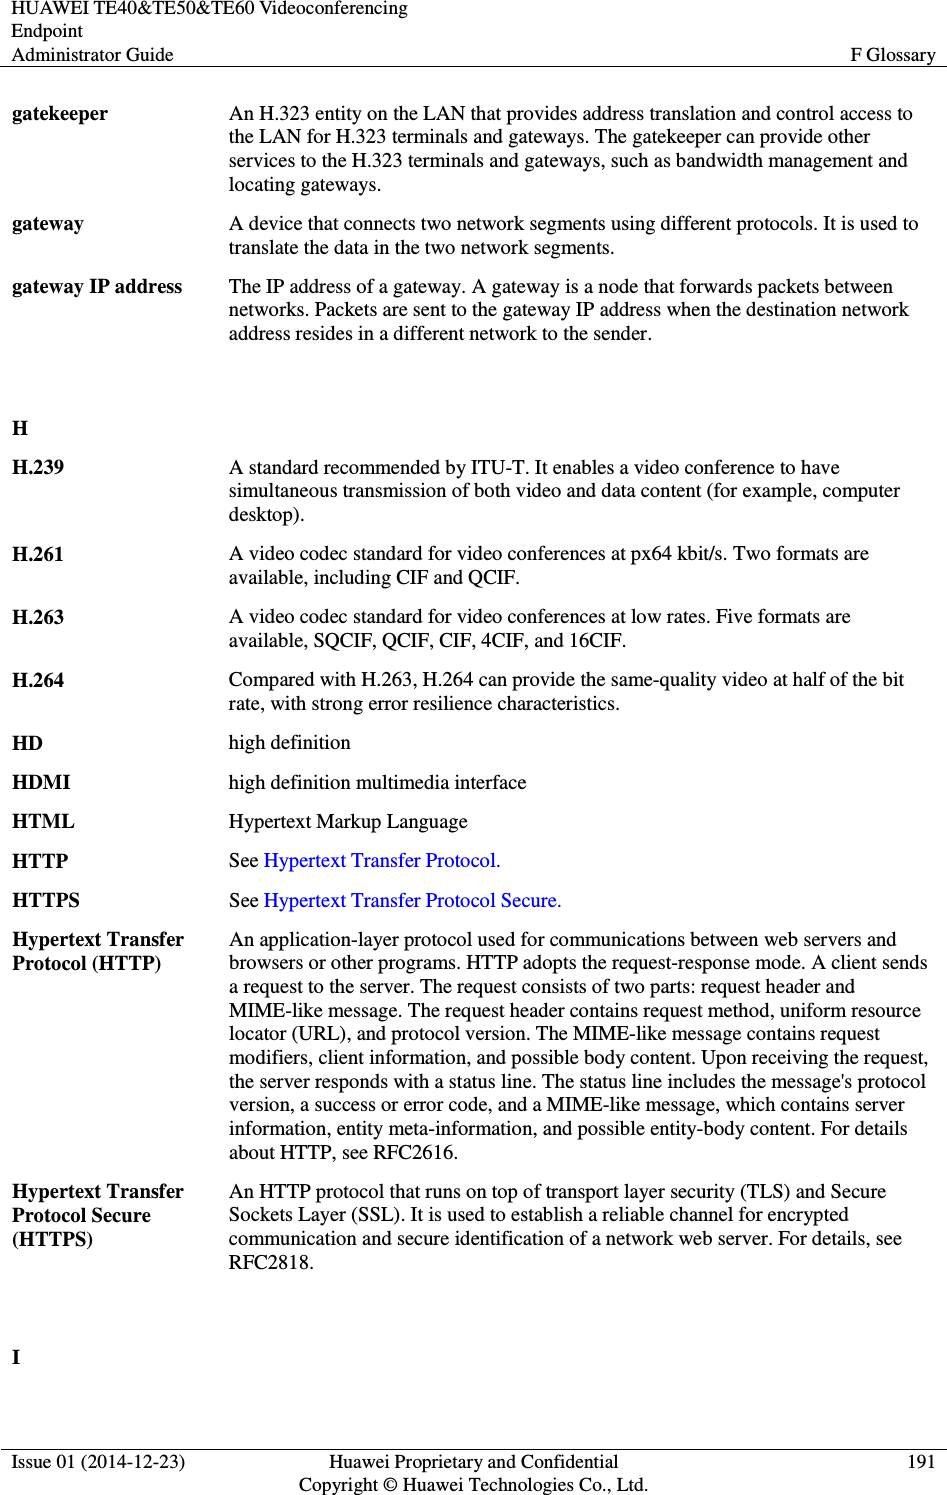 HUAWEI TE40&amp;TE50&amp;TE60 Videoconferencing Endpoint Administrator Guide  F Glossary  Issue 01 (2014-12-23)  Huawei Proprietary and Confidential                                     Copyright © Huawei Technologies Co., Ltd. 191  gatekeeper An H.323 entity on the LAN that provides address translation and control access to the LAN for H.323 terminals and gateways. The gatekeeper can provide other services to the H.323 terminals and gateways, such as bandwidth management and locating gateways. gateway A device that connects two network segments using different protocols. It is used to translate the data in the two network segments. gateway IP address The IP address of a gateway. A gateway is a node that forwards packets between networks. Packets are sent to the gateway IP address when the destination network address resides in a different network to the sender.   H  H.239 A standard recommended by ITU-T. It enables a video conference to have simultaneous transmission of both video and data content (for example, computer desktop). H.261 A video codec standard for video conferences at px64 kbit/s. Two formats are available, including CIF and QCIF. H.263 A video codec standard for video conferences at low rates. Five formats are available, SQCIF, QCIF, CIF, 4CIF, and 16CIF. H.264 Compared with H.263, H.264 can provide the same-quality video at half of the bit rate, with strong error resilience characteristics. HD high definition HDMI high definition multimedia interface HTML Hypertext Markup Language HTTP See Hypertext Transfer Protocol. HTTPS See Hypertext Transfer Protocol Secure. Hypertext Transfer Protocol (HTTP) An application-layer protocol used for communications between web servers and browsers or other programs. HTTP adopts the request-response mode. A client sends a request to the server. The request consists of two parts: request header and MIME-like message. The request header contains request method, uniform resource locator (URL), and protocol version. The MIME-like message contains request modifiers, client information, and possible body content. Upon receiving the request, the server responds with a status line. The status line includes the message&apos;s protocol version, a success or error code, and a MIME-like message, which contains server information, entity meta-information, and possible entity-body content. For details about HTTP, see RFC2616. Hypertext Transfer Protocol Secure (HTTPS) An HTTP protocol that runs on top of transport layer security (TLS) and Secure Sockets Layer (SSL). It is used to establish a reliable channel for encrypted communication and secure identification of a network web server. For details, see RFC2818.   I  